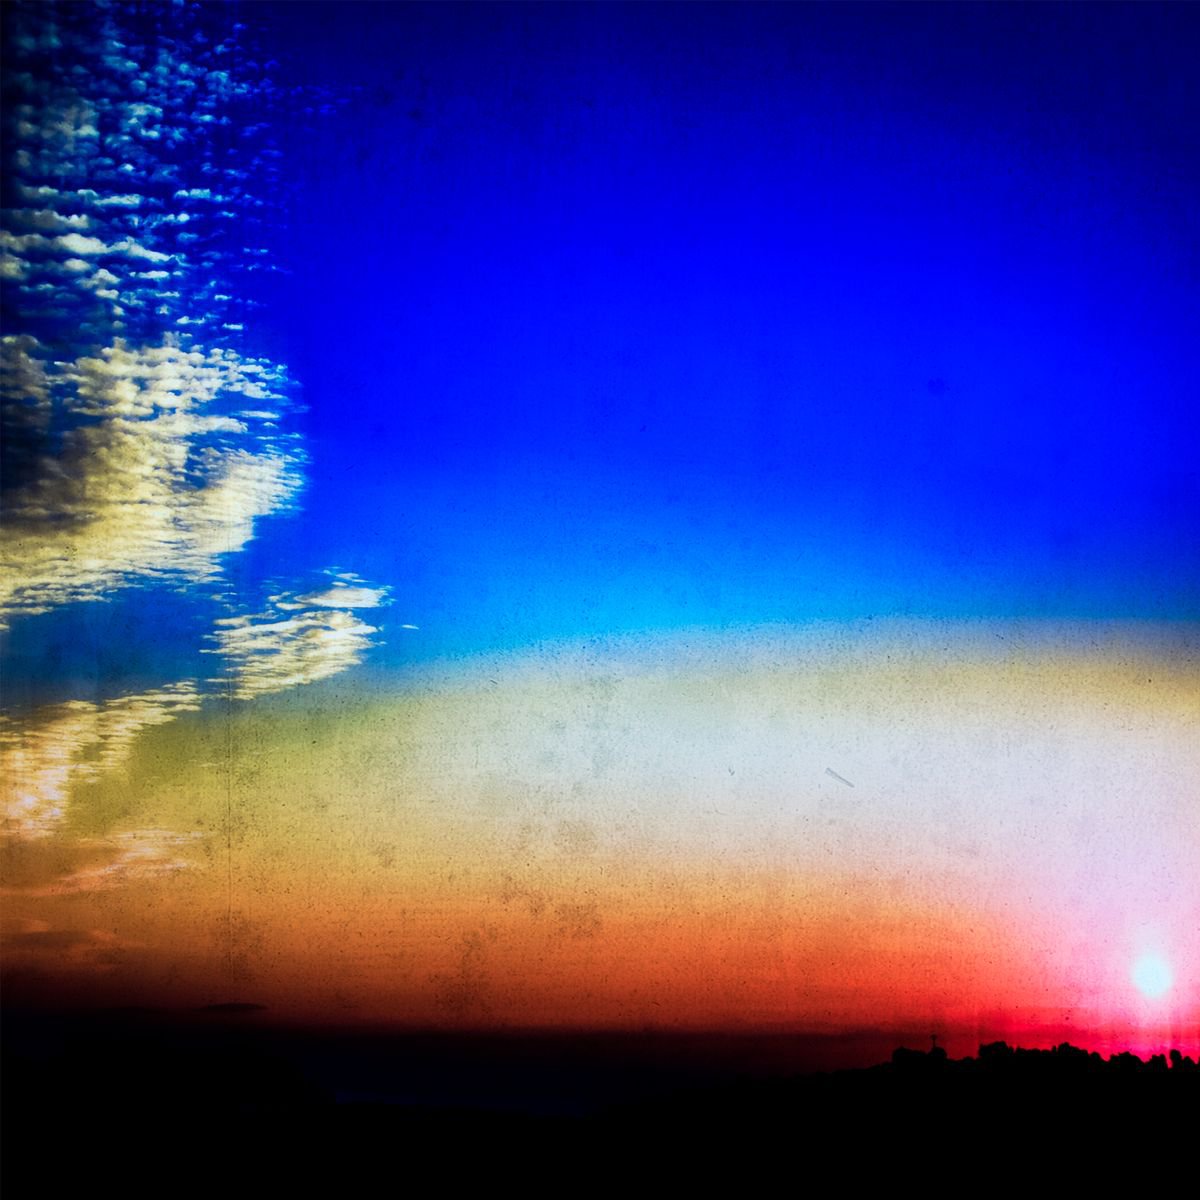 Vivid Sunset #1 Limited Edition 1/50 10x10 inch Photographic Print. by Graham Briggs